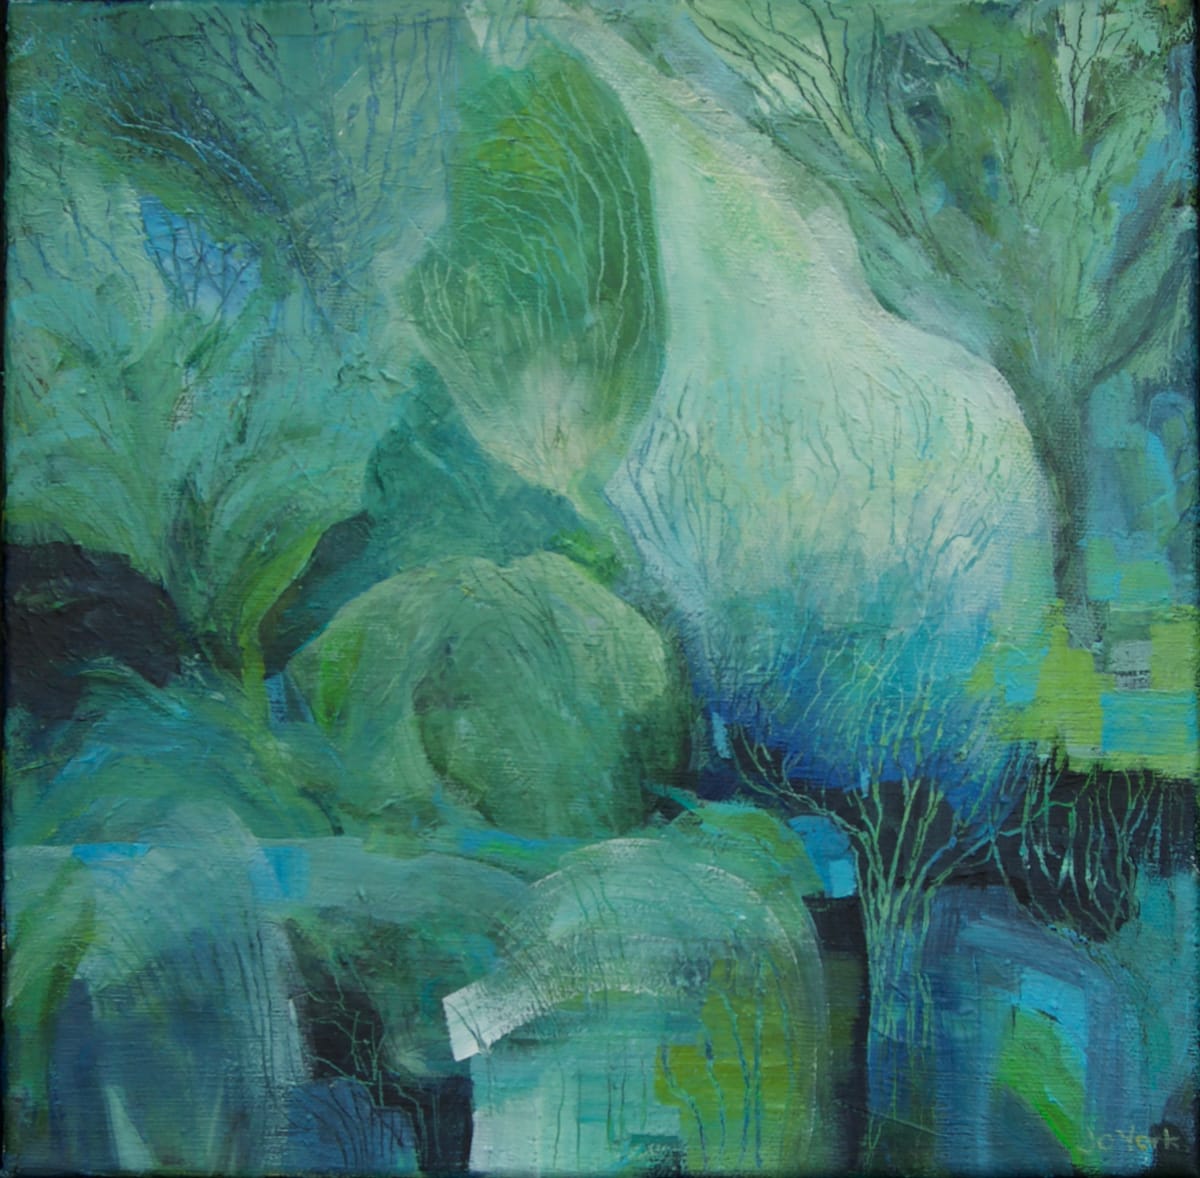 Seas of Green by Jo York  Image: Highly textured and atmospheric painting inspired by the colours, shapes and light of Logan Botanic Gardens.
painted in multiple layers of acrylics with overlaid colour and  s'graffito marks.